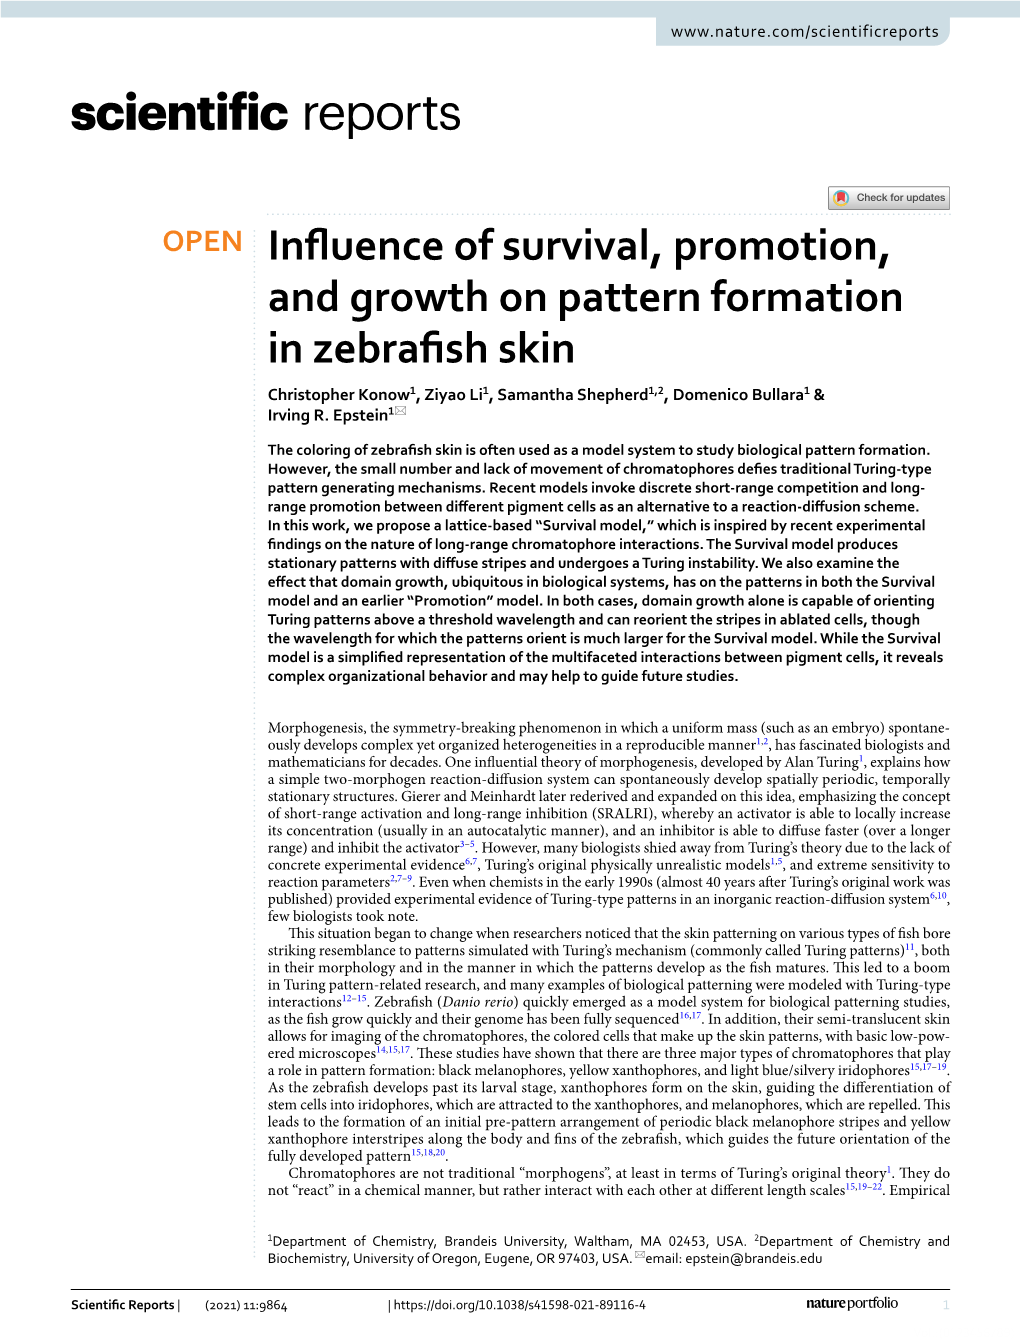 Influence of Survival, Promotion, and Growth on Pattern Formation In